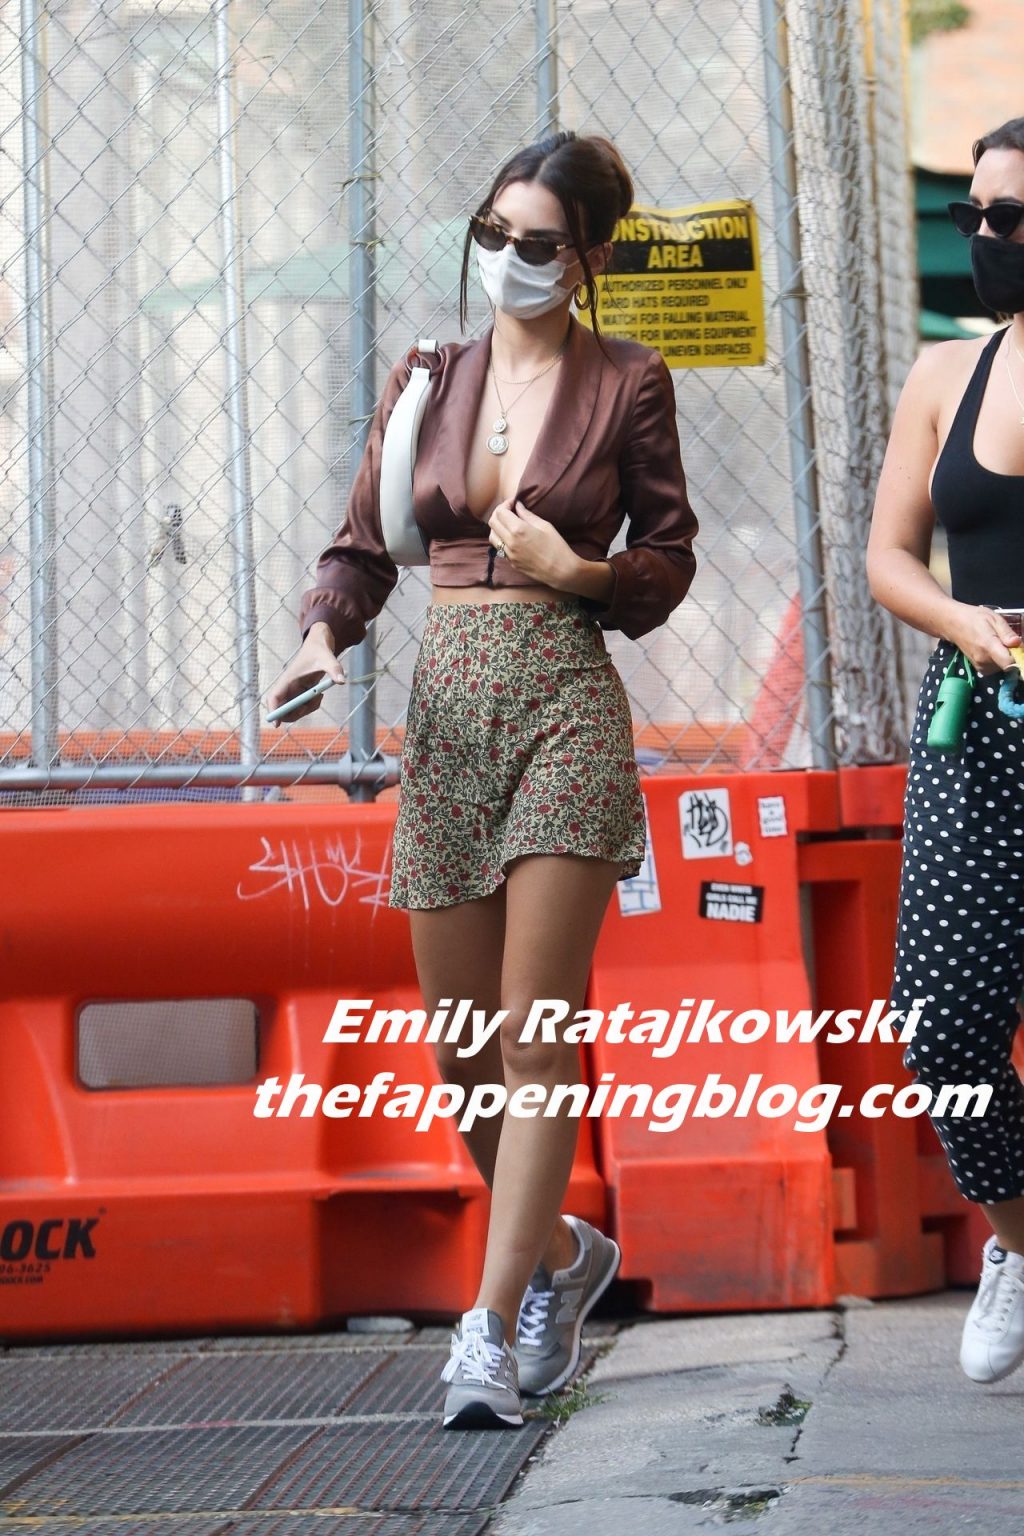 Emily Ratajkowski Displays Her Sexy Legs and Tits While on a Walk in NYC (38 Photos)